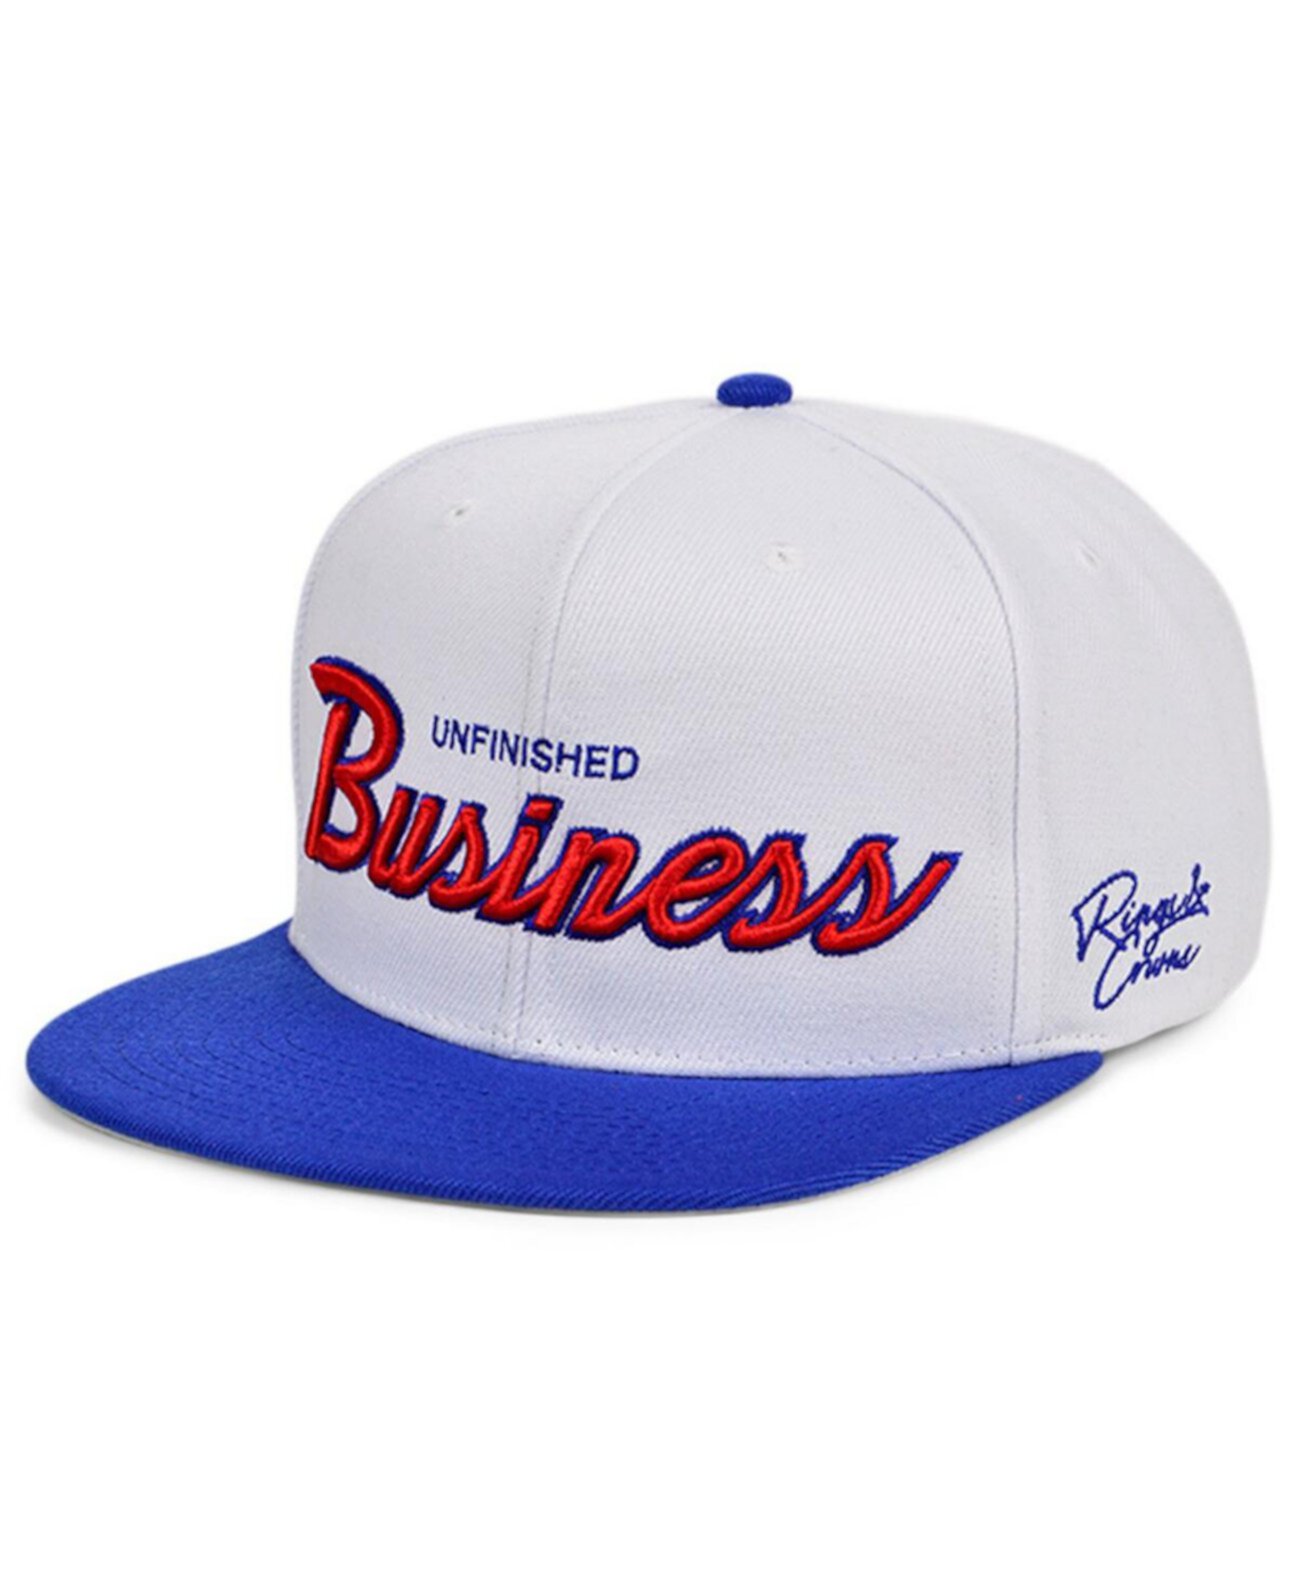 Men's White and Red Unfinished Business Snapback Hat Rings & Crwns